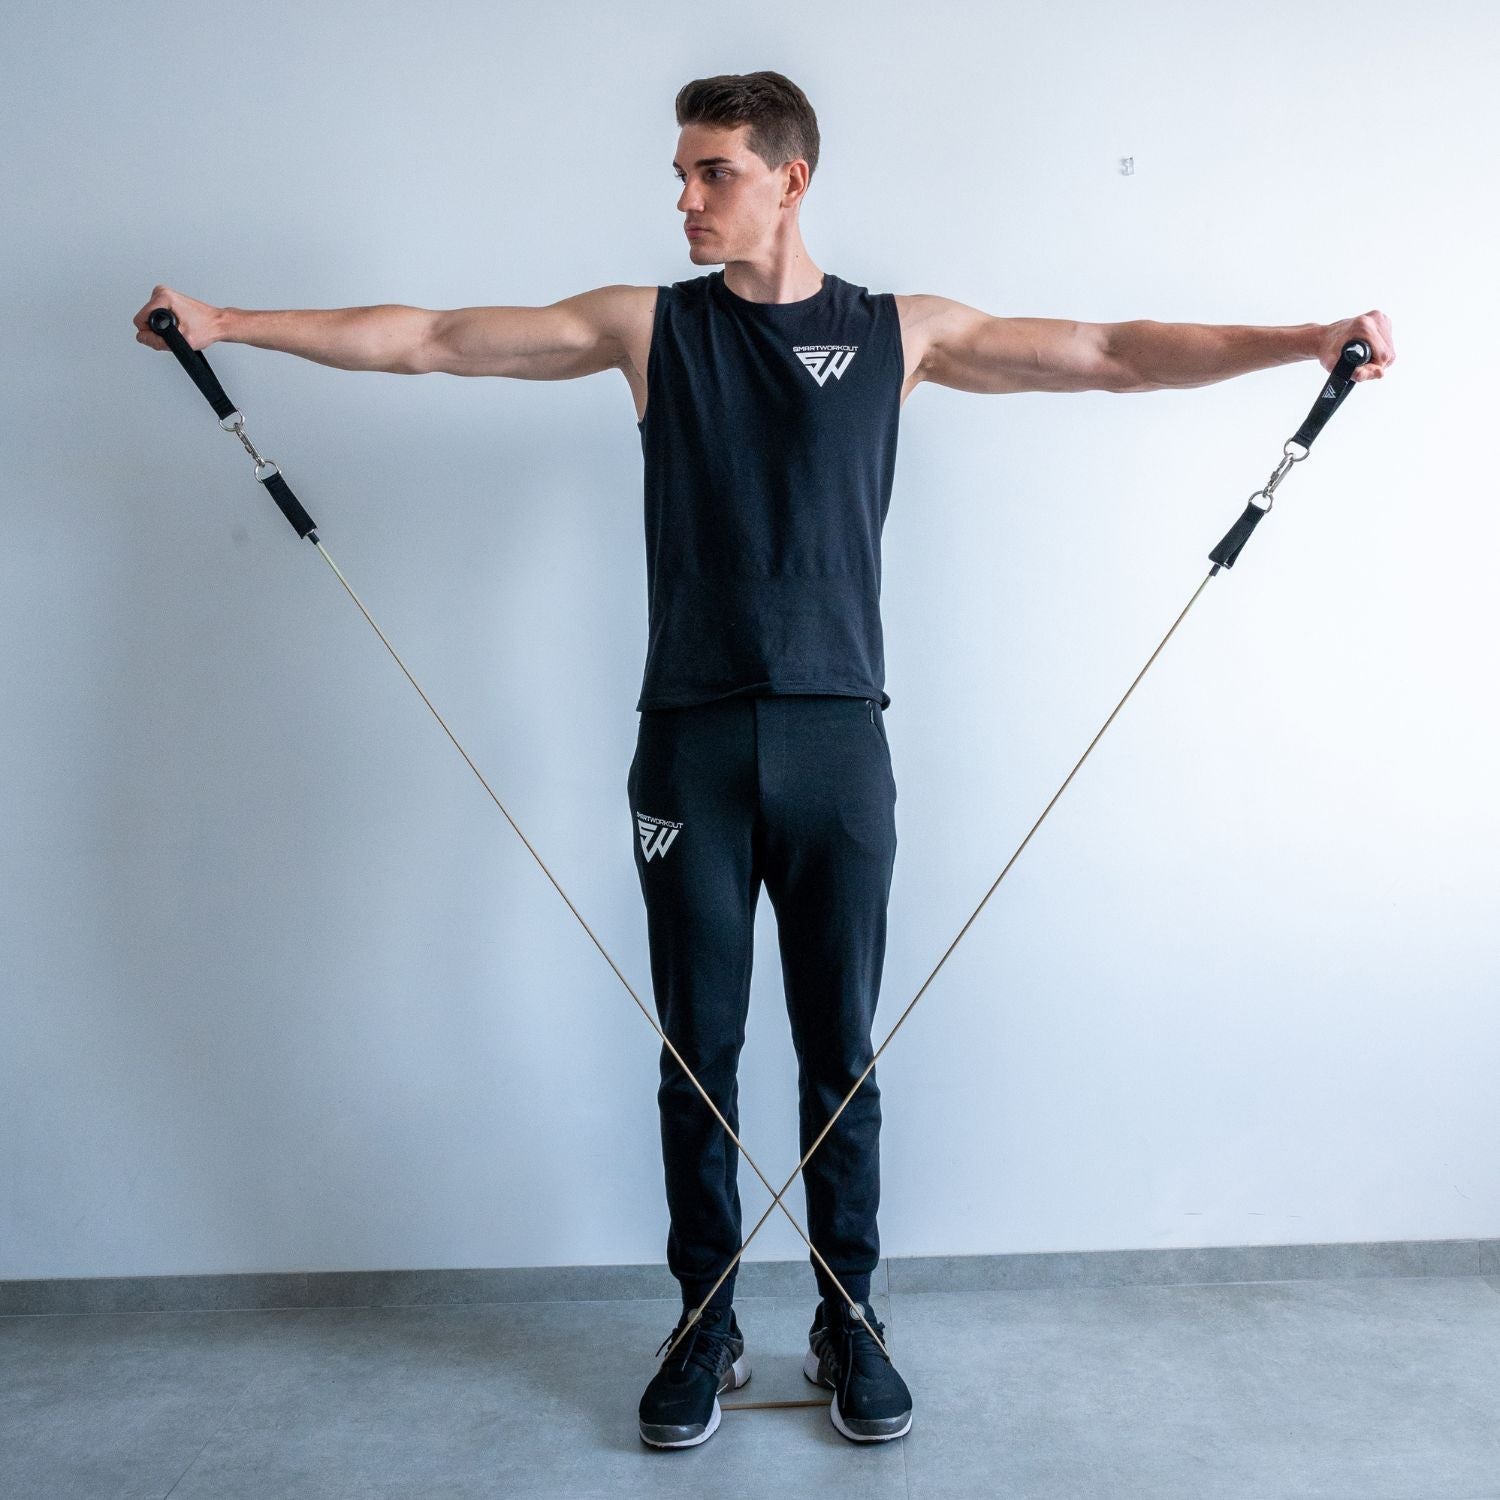 Shoulder Exercise with Resistance band